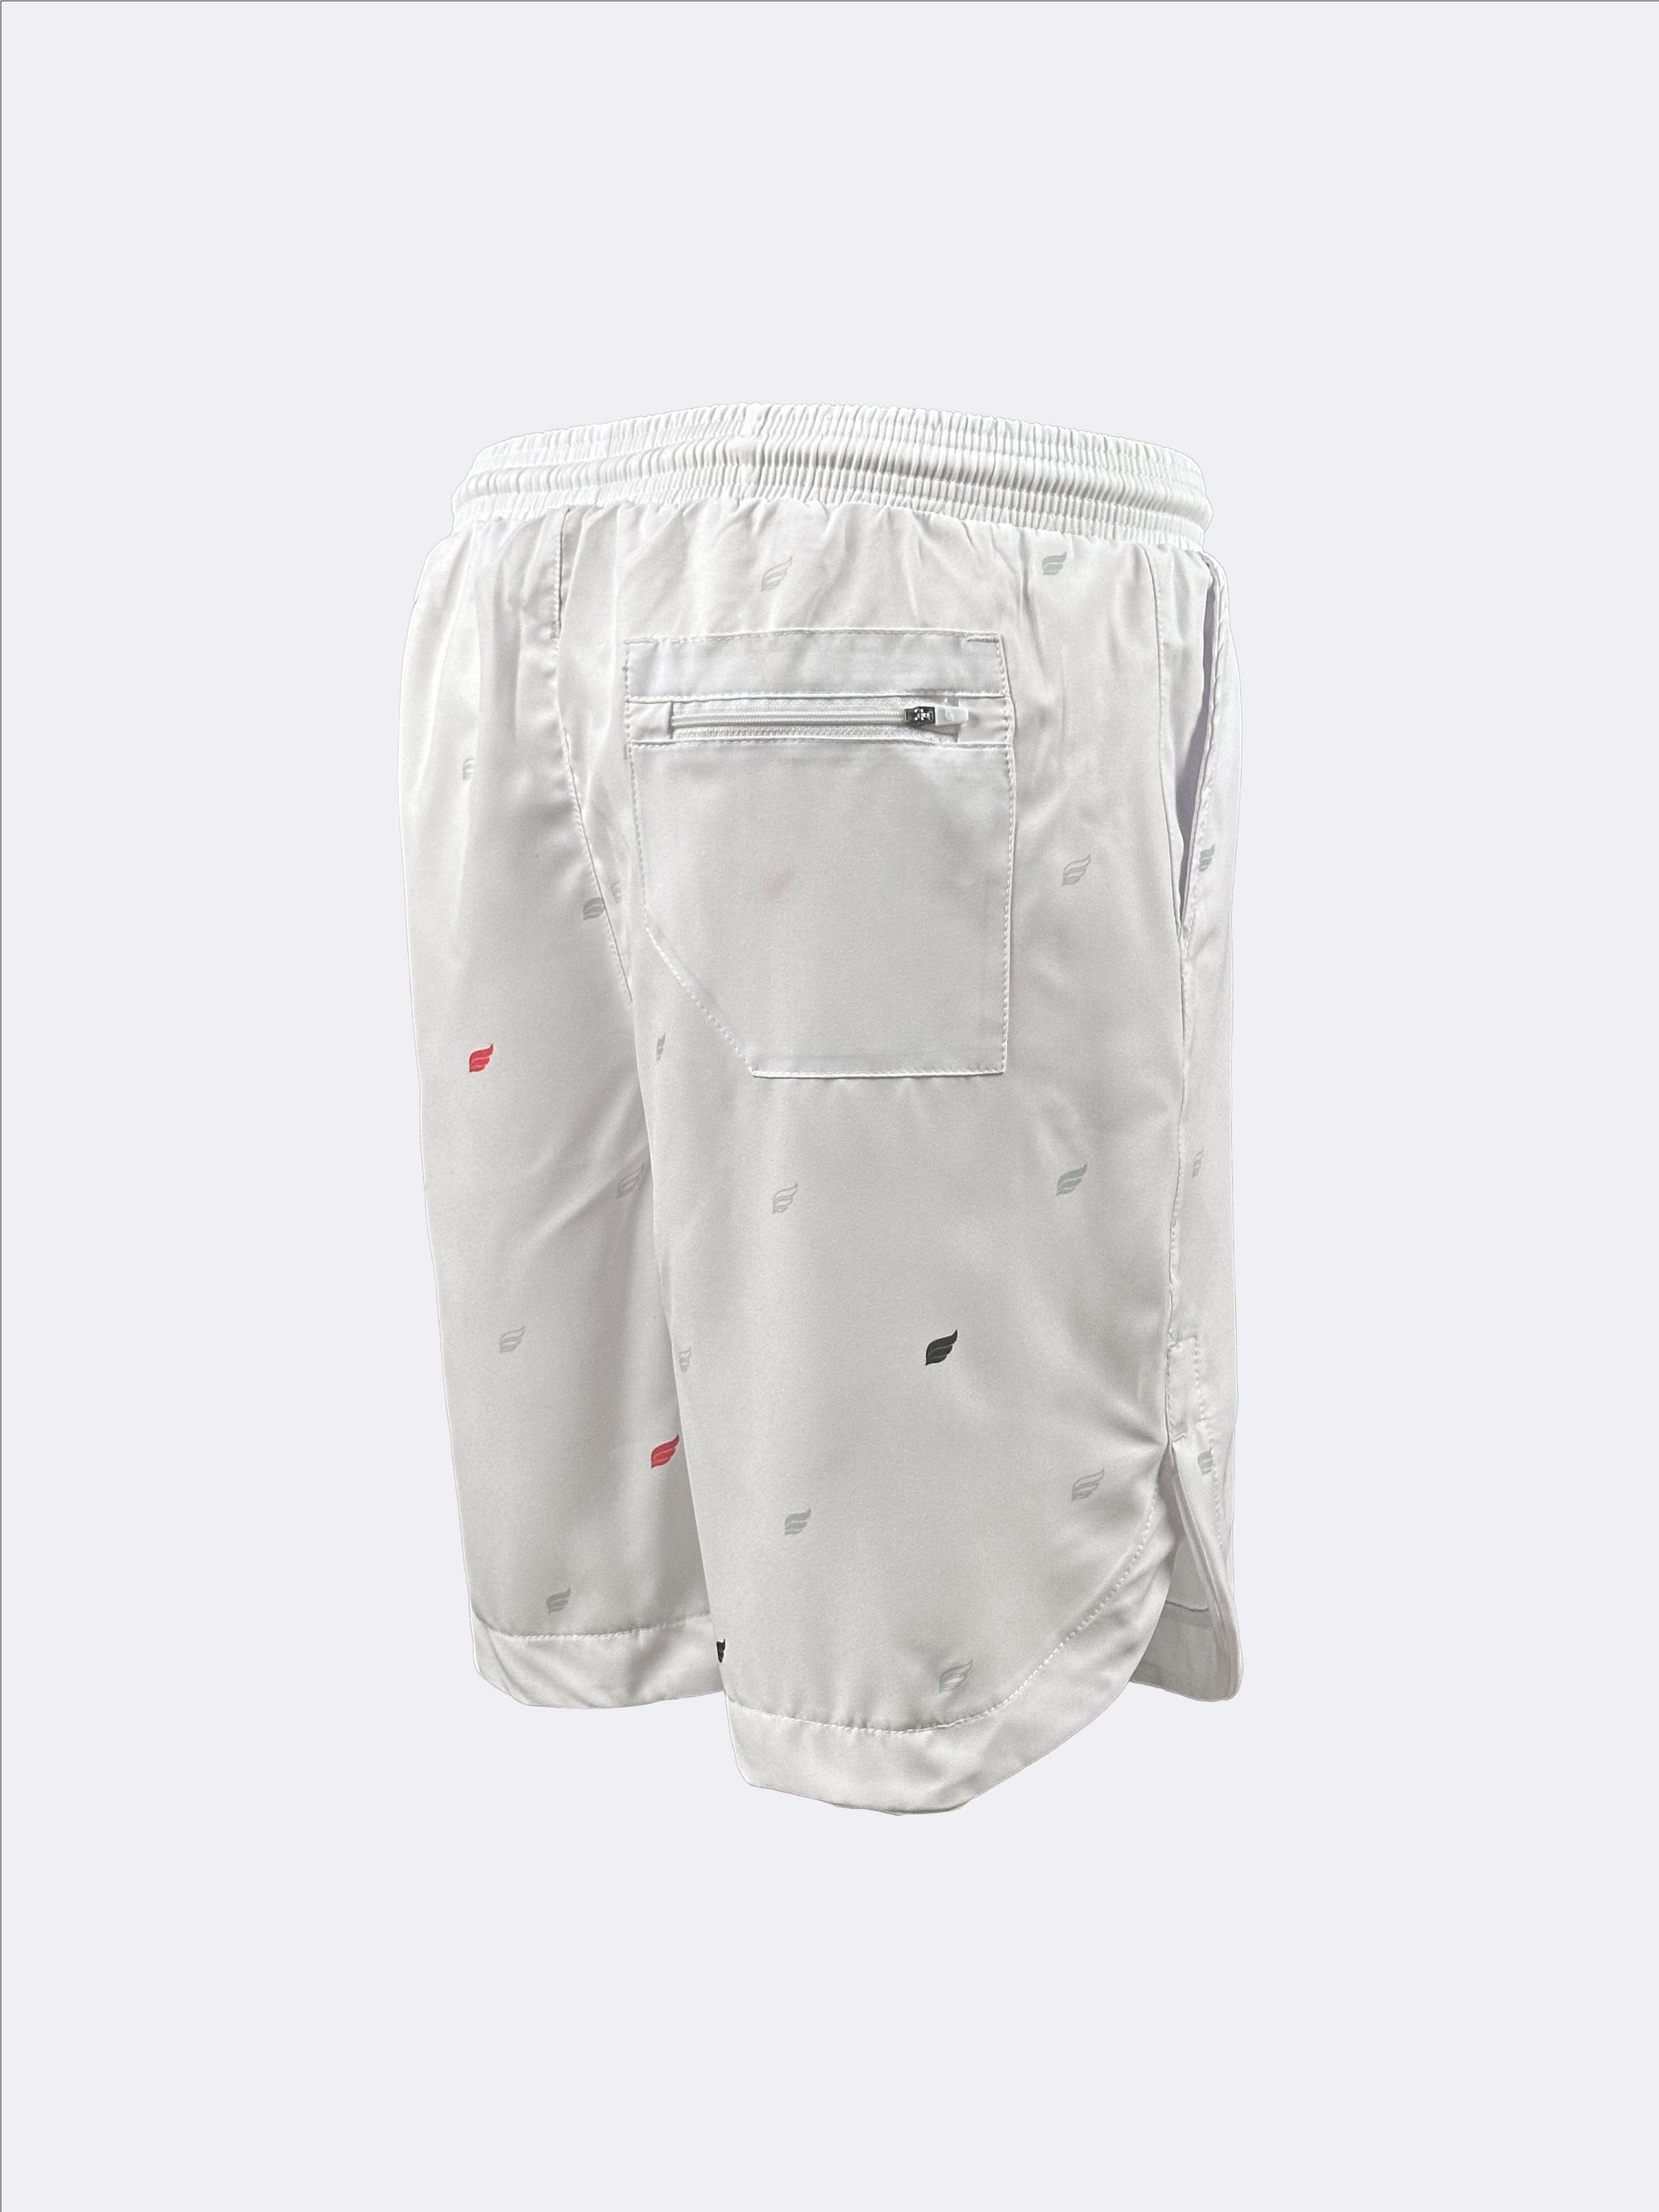 LEGEND SHORTS - WINGS WHITE